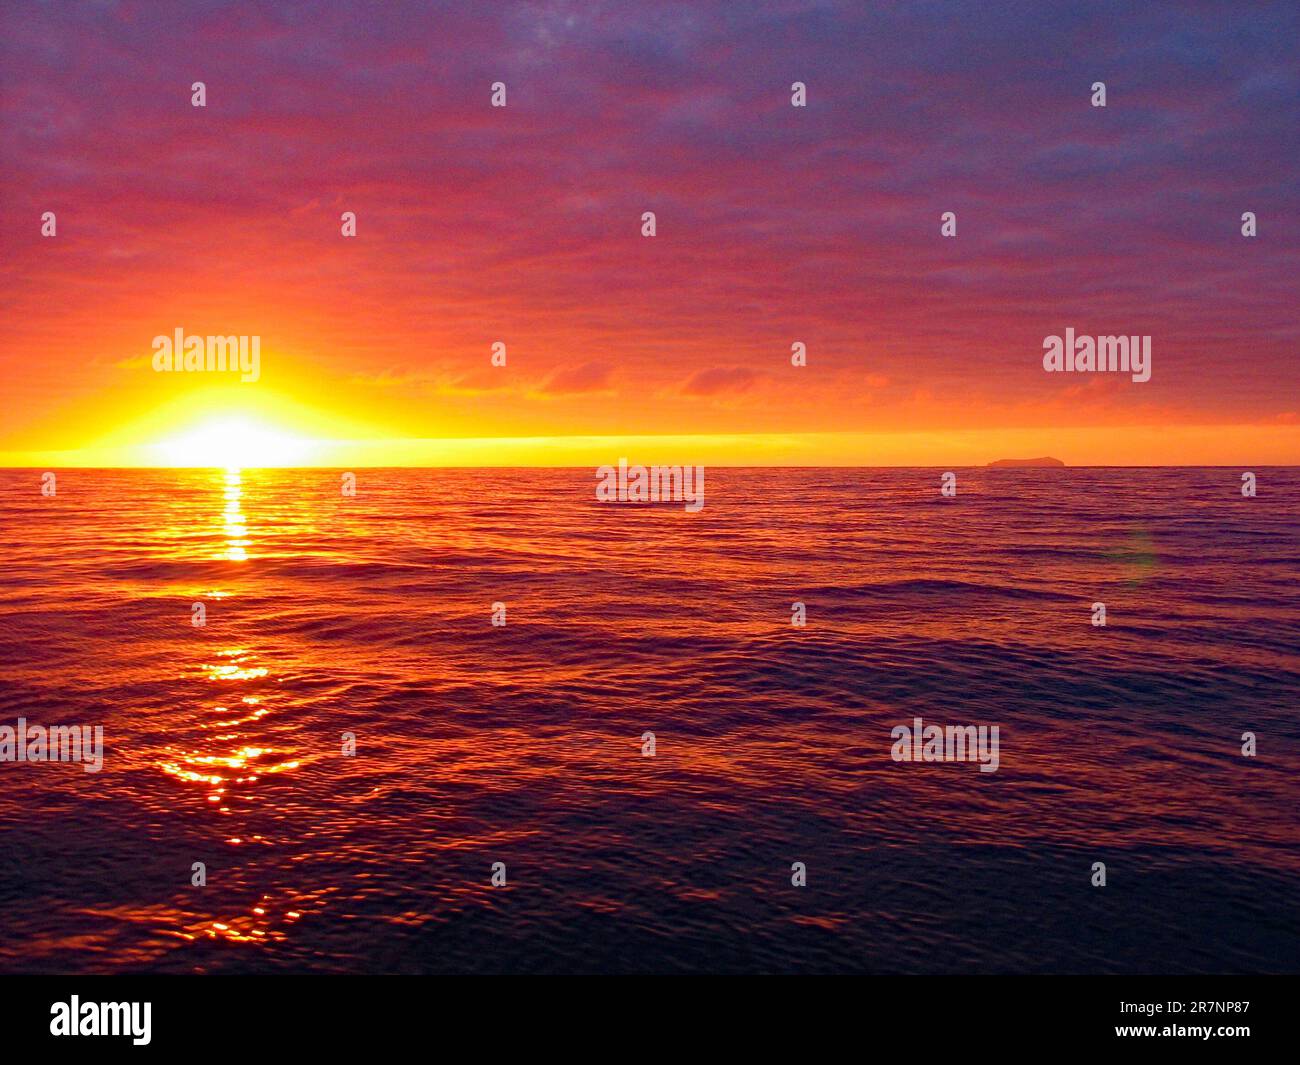 Wolf Island (Wenman Island), Galapagos, view at sunset from a boat crossing the Pacific Ocean (authentic colors, no filtration) Stock Photo